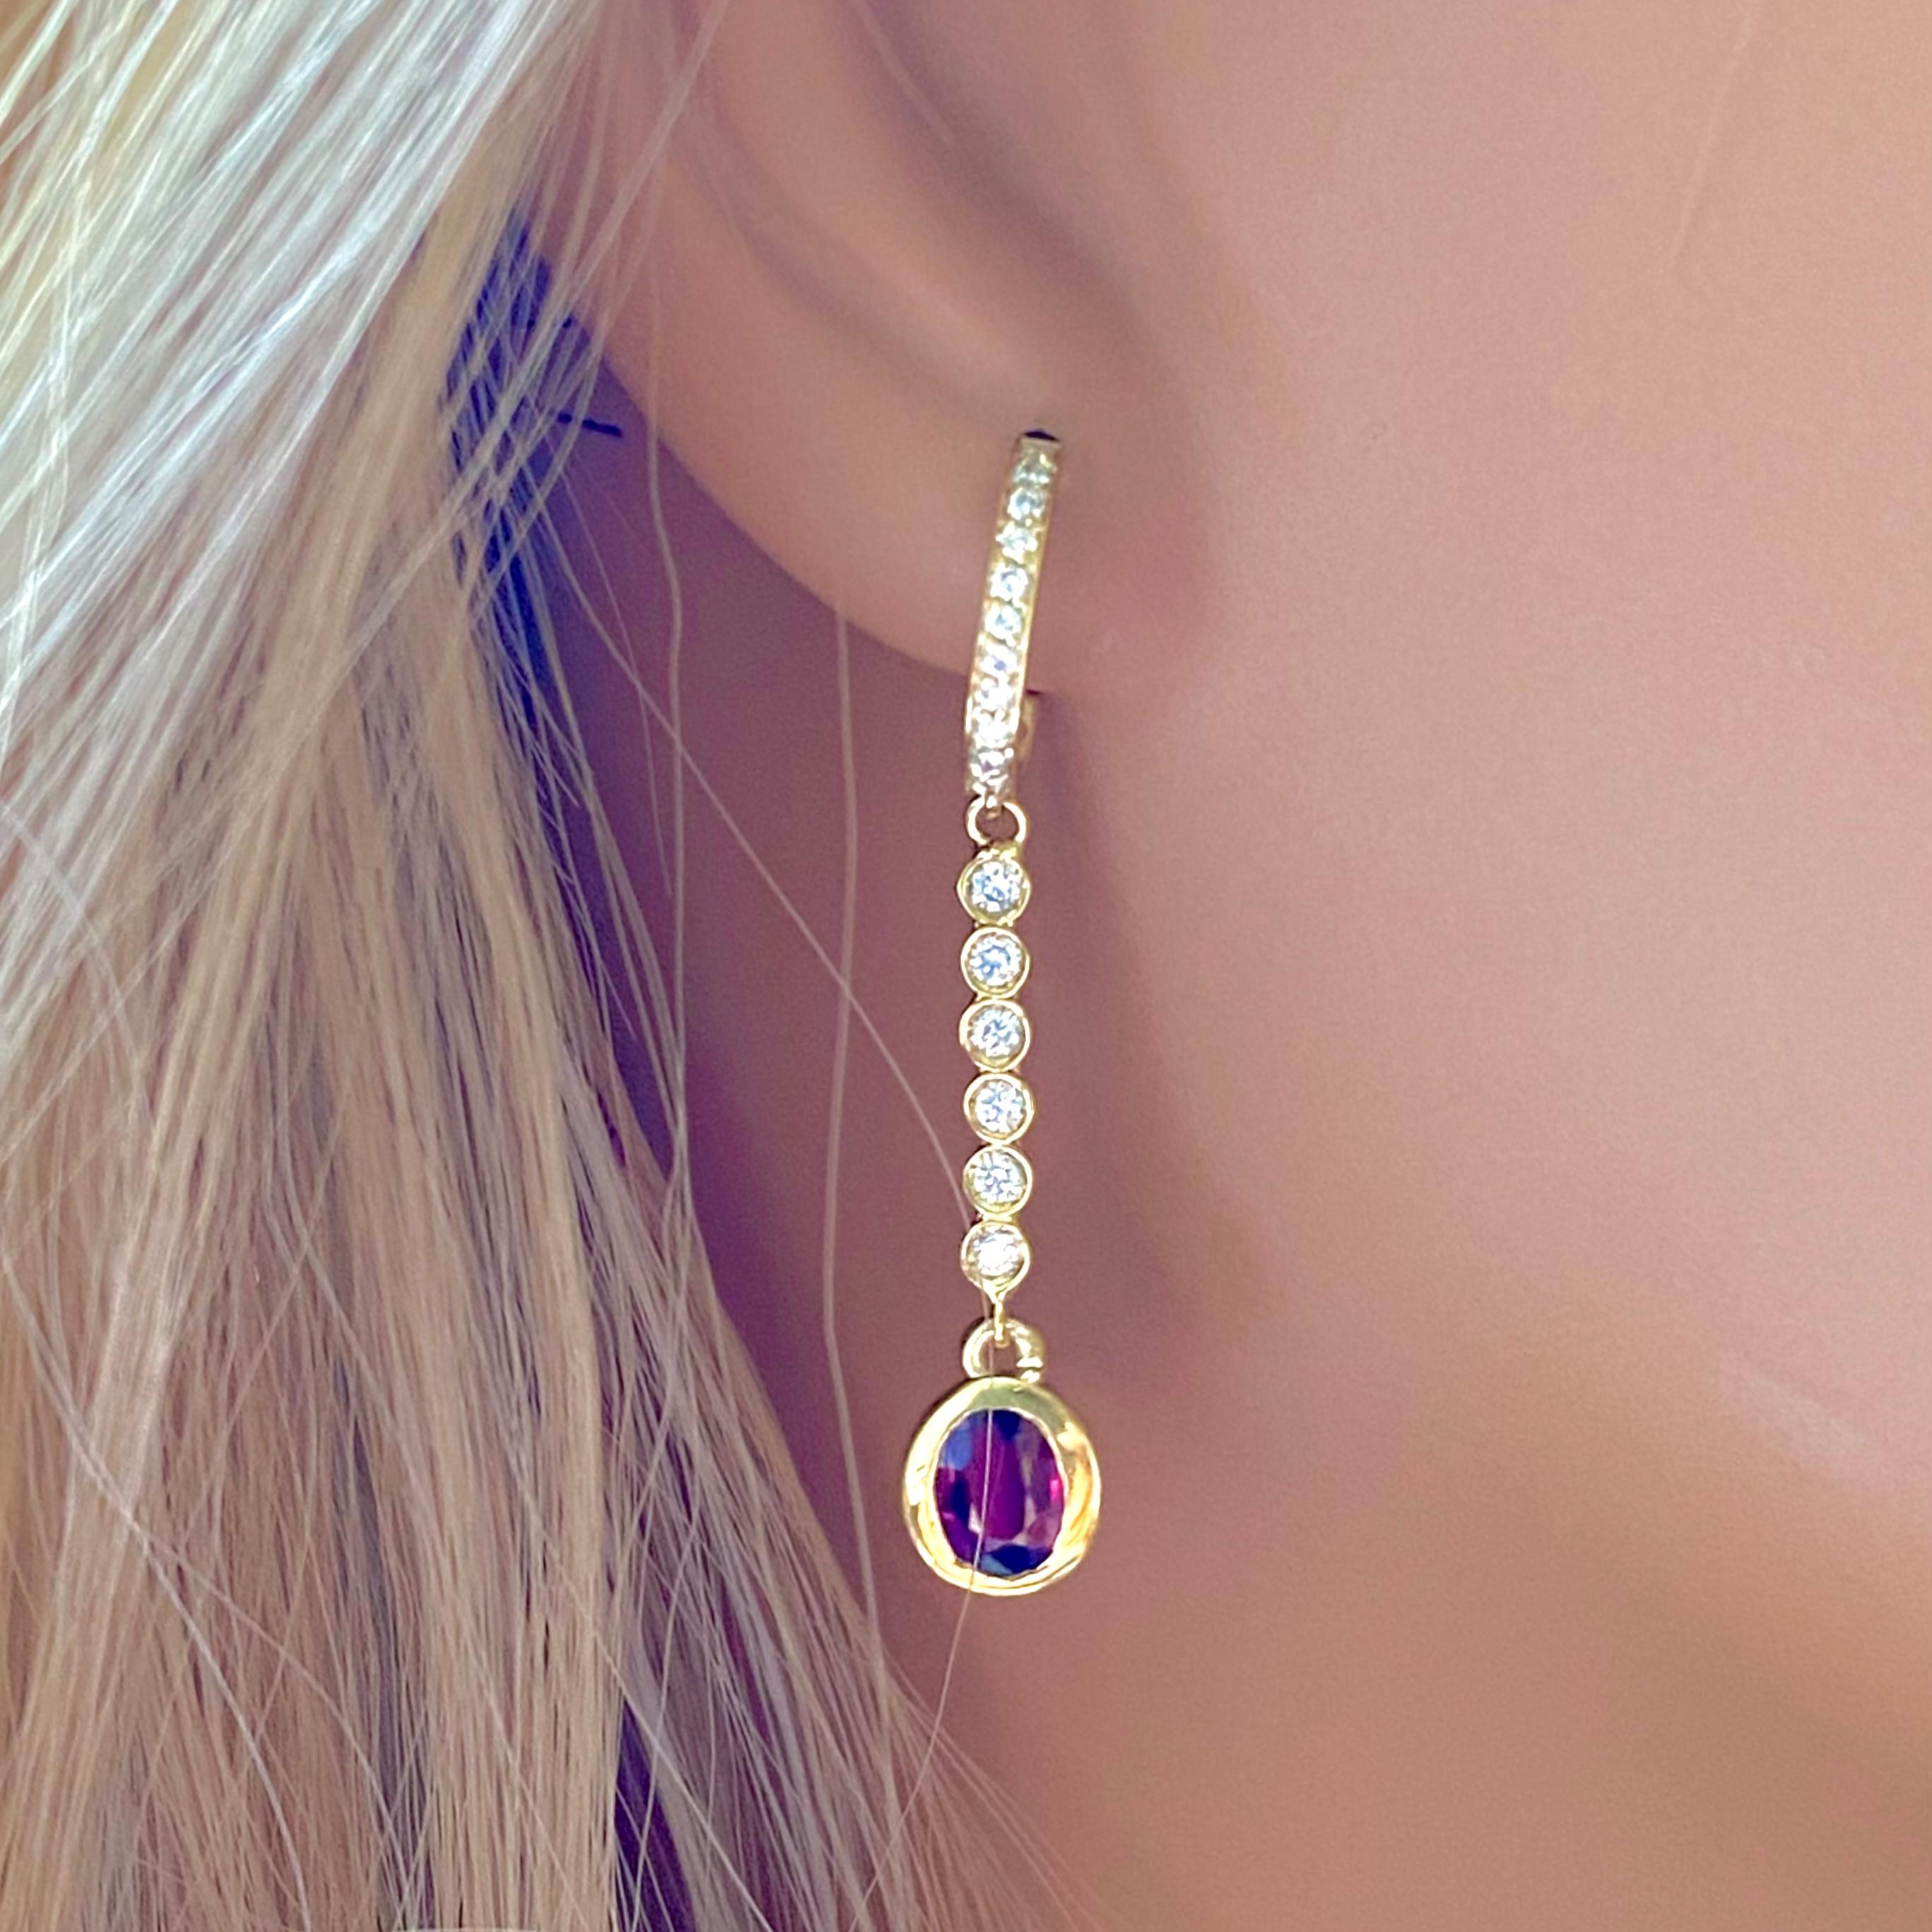 Bezel Set Burma Ruby Diamond 1.75 Carat 1.6 Inch Long Yellow Gold Earrings In New Condition For Sale In New York, NY